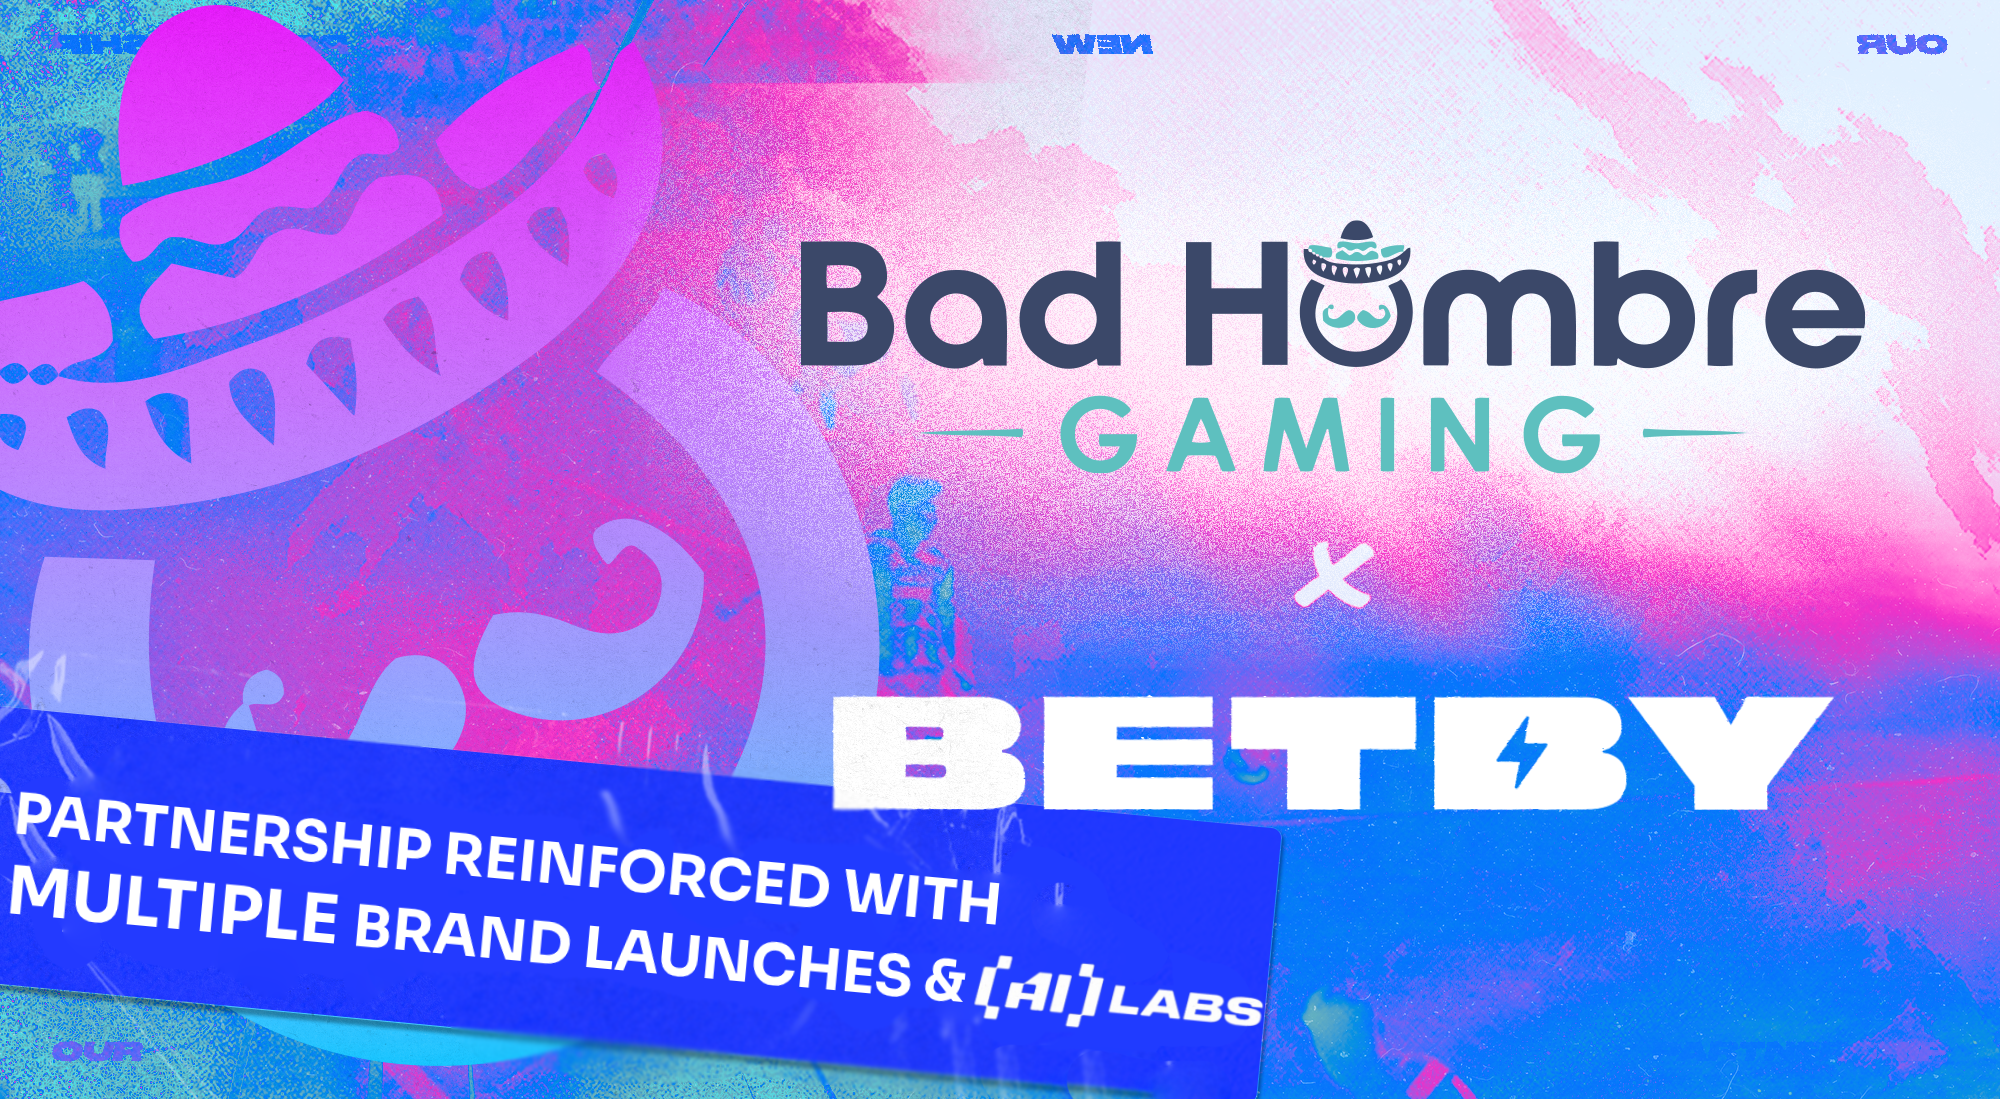 BETBY strengthens Bad Hombre Gaming partnership with multiple brand launches and AI Labs Tools rollout